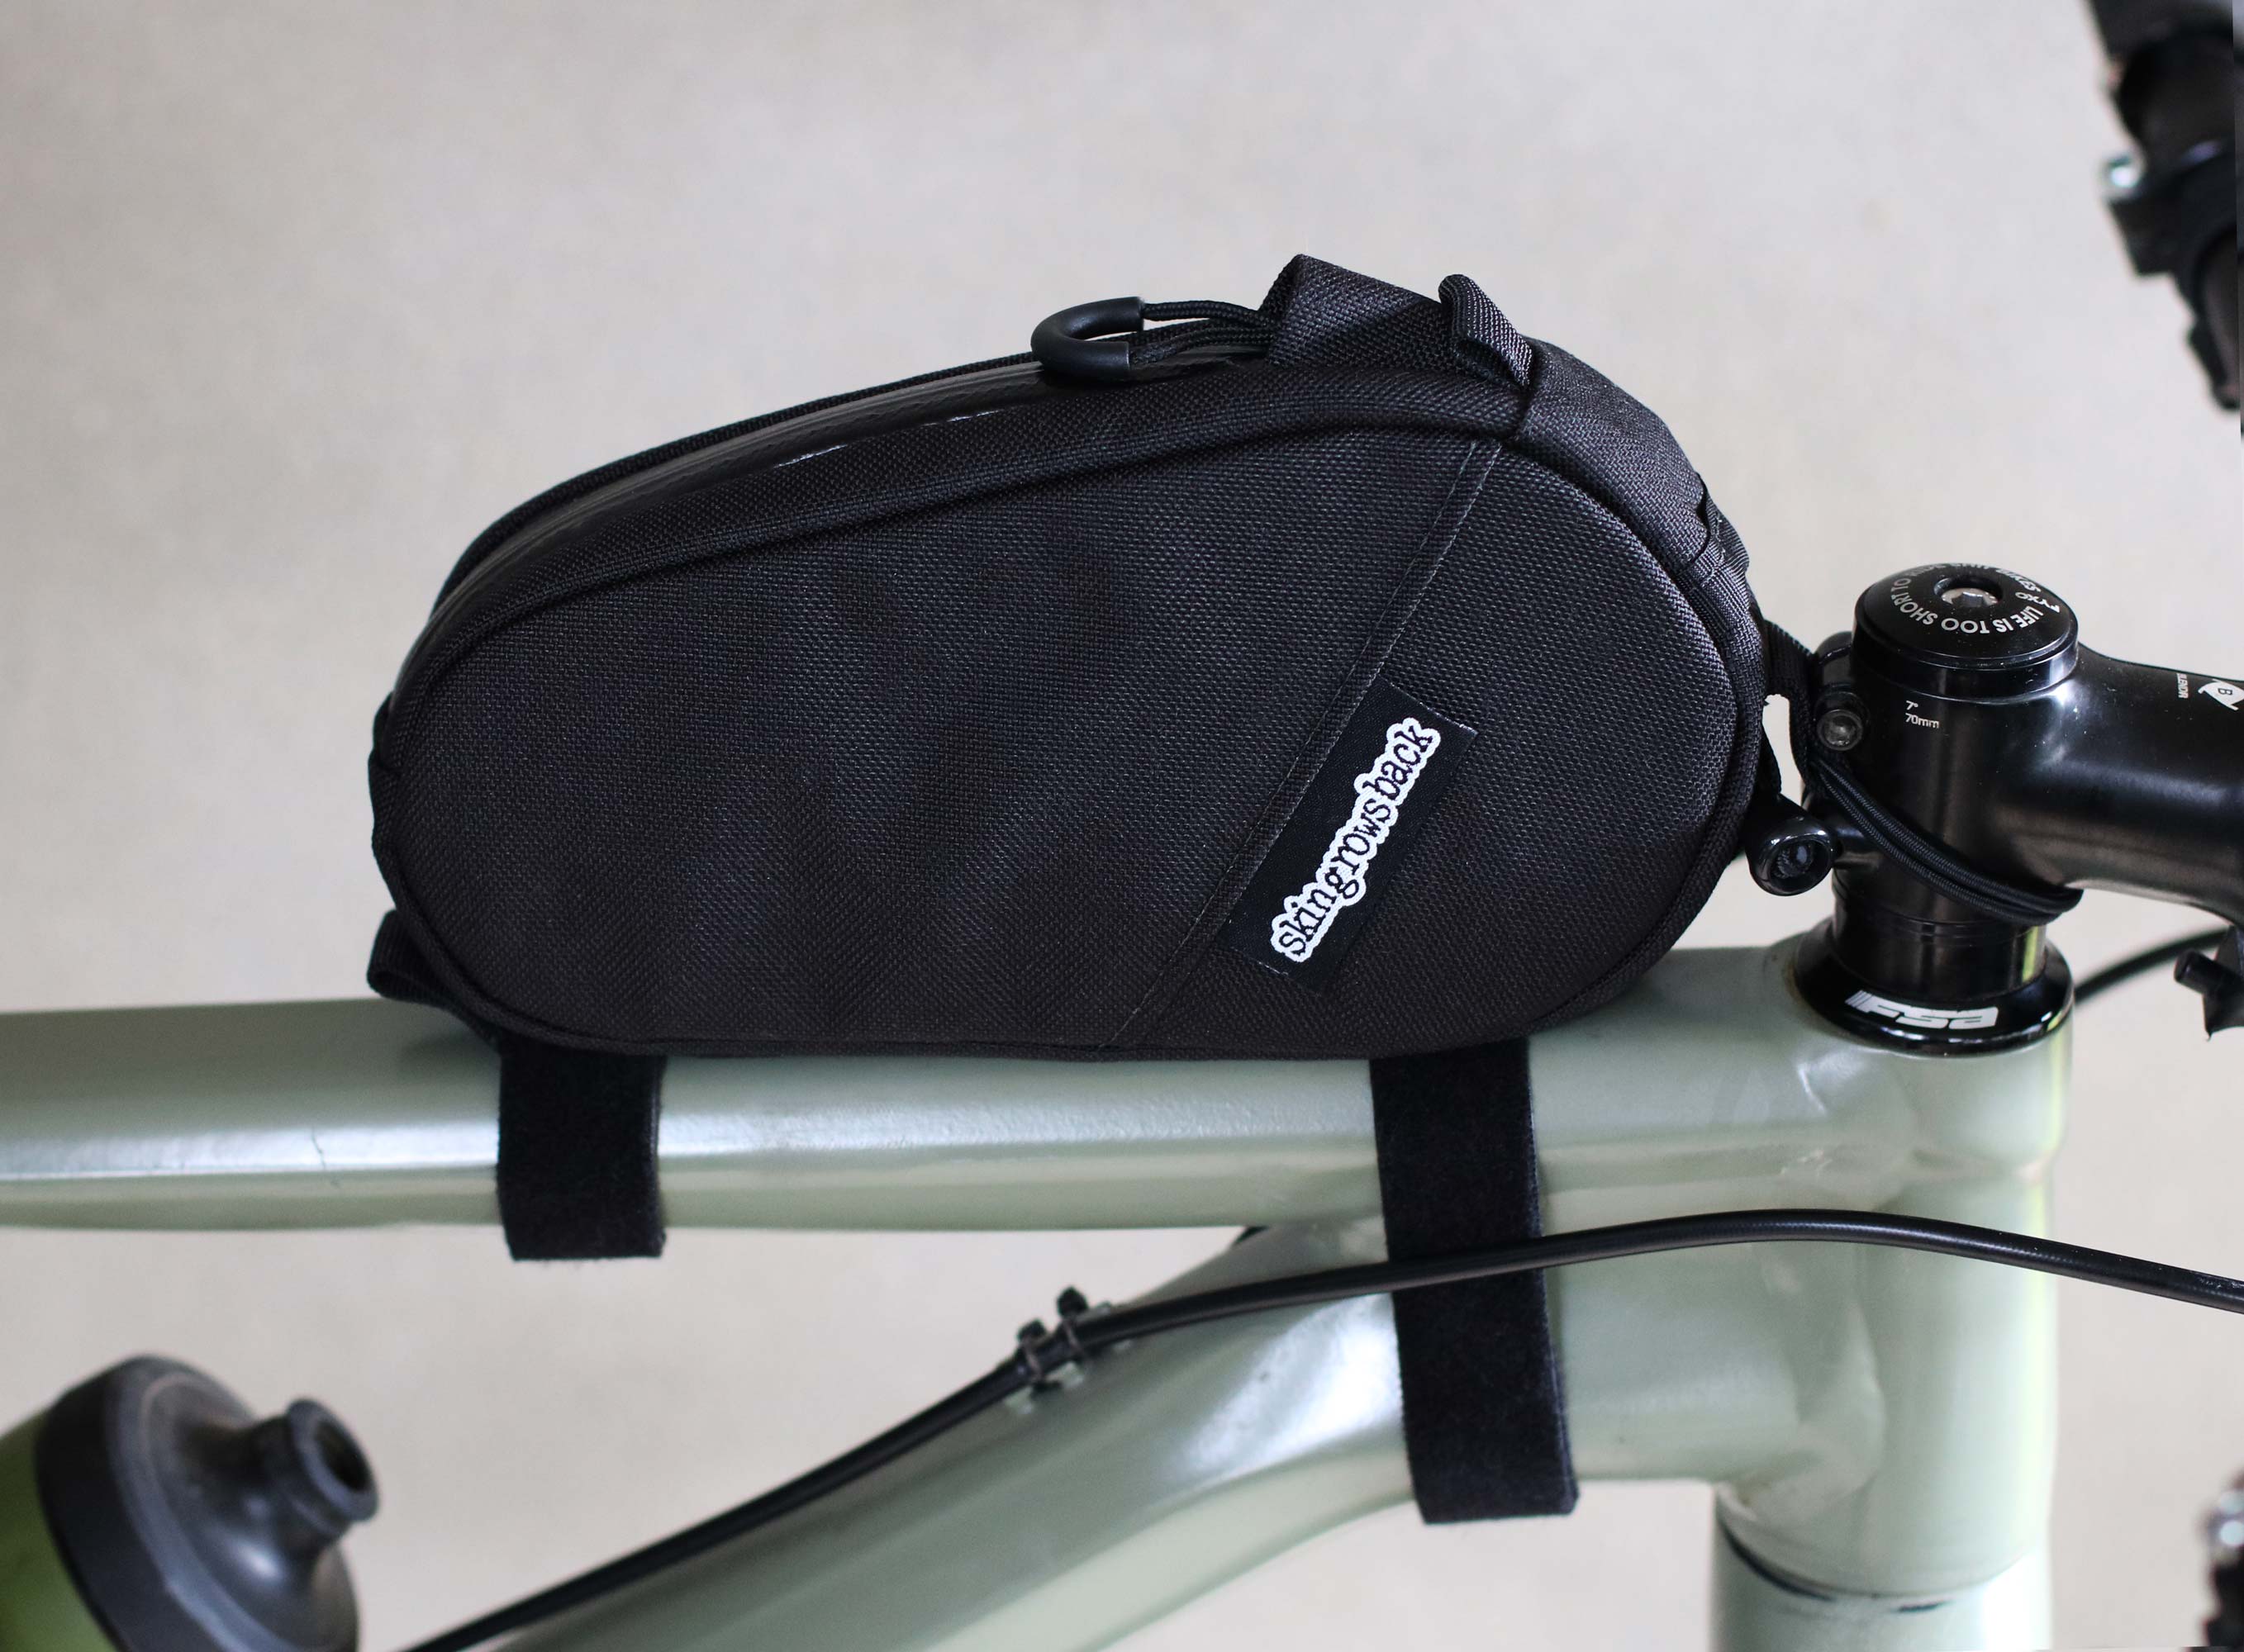 Tailfin Top Tube Packs Offer Extra Bikepacking Storage for All Sizes   Preferences Review  Bikerumor